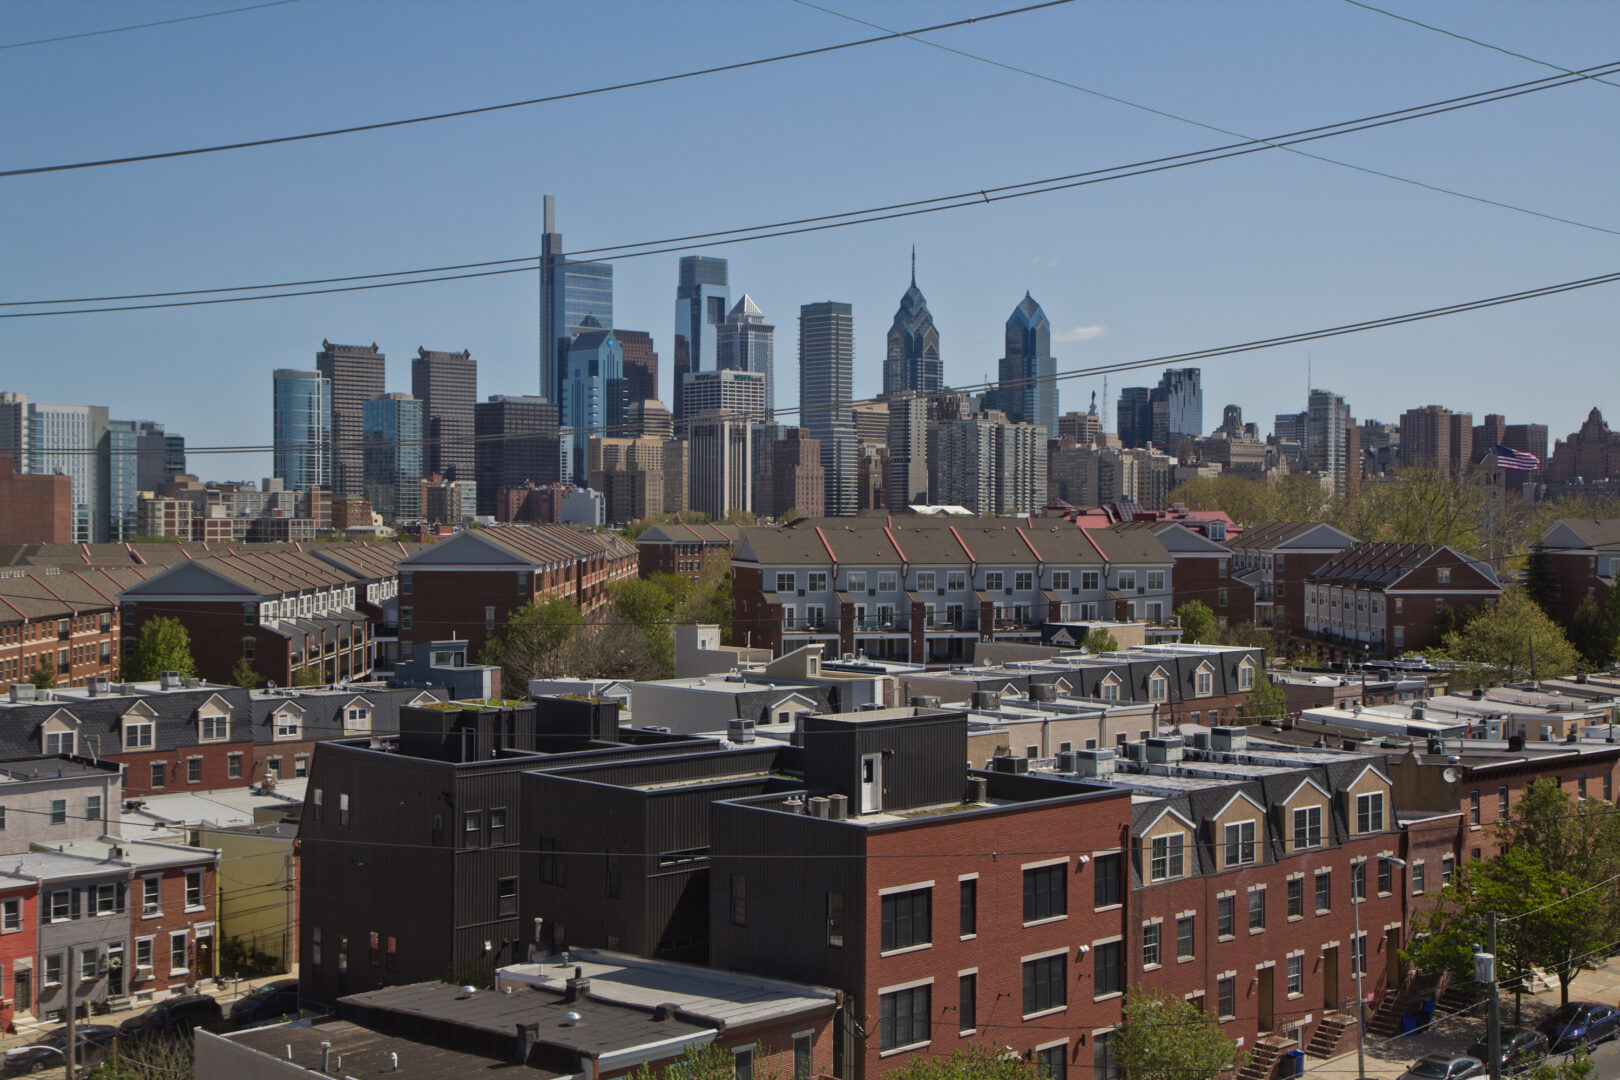 View of Center City Philadelphia looking North from atop the Vicinity Energy building in South Philadelphia.